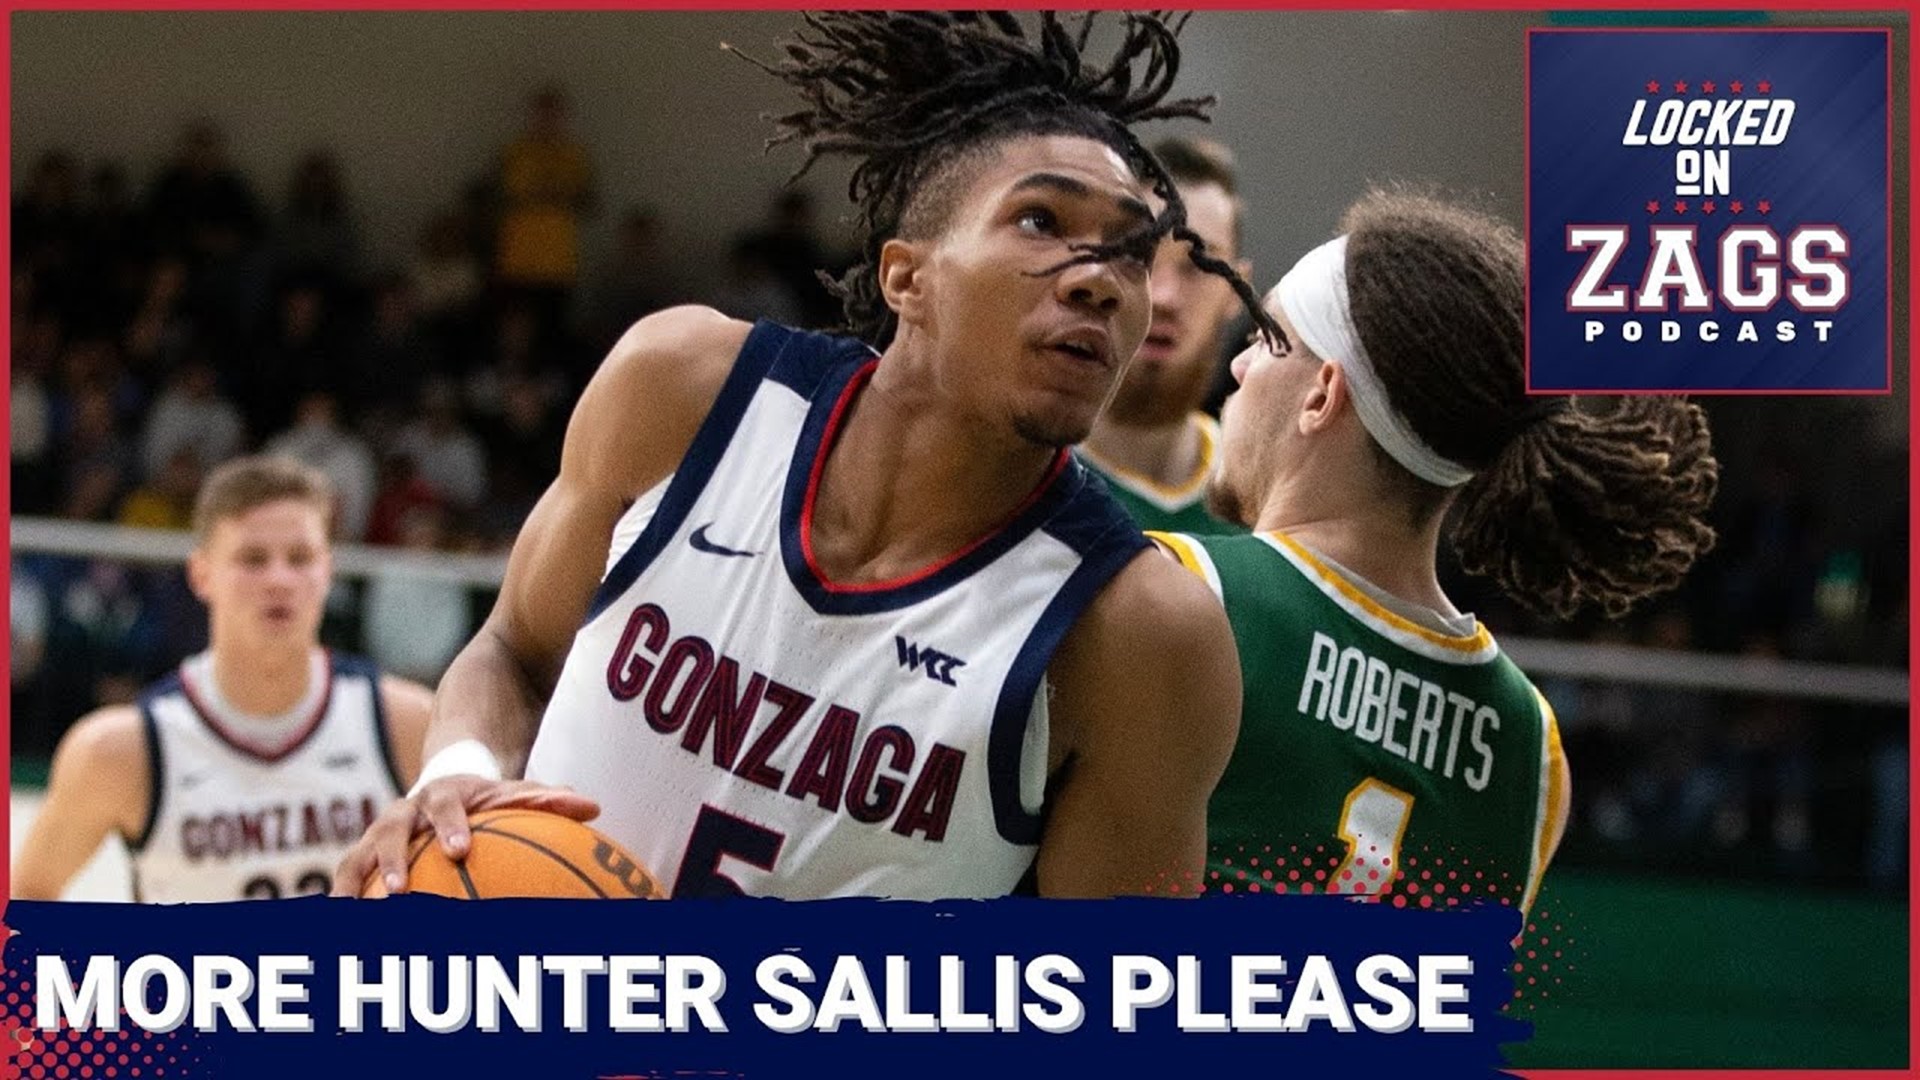 Hunter Sallis played just 17 minutes combined last week, calling into question Gonzaga Coach Mark Few's resistance to playing anyone other than his starting five.